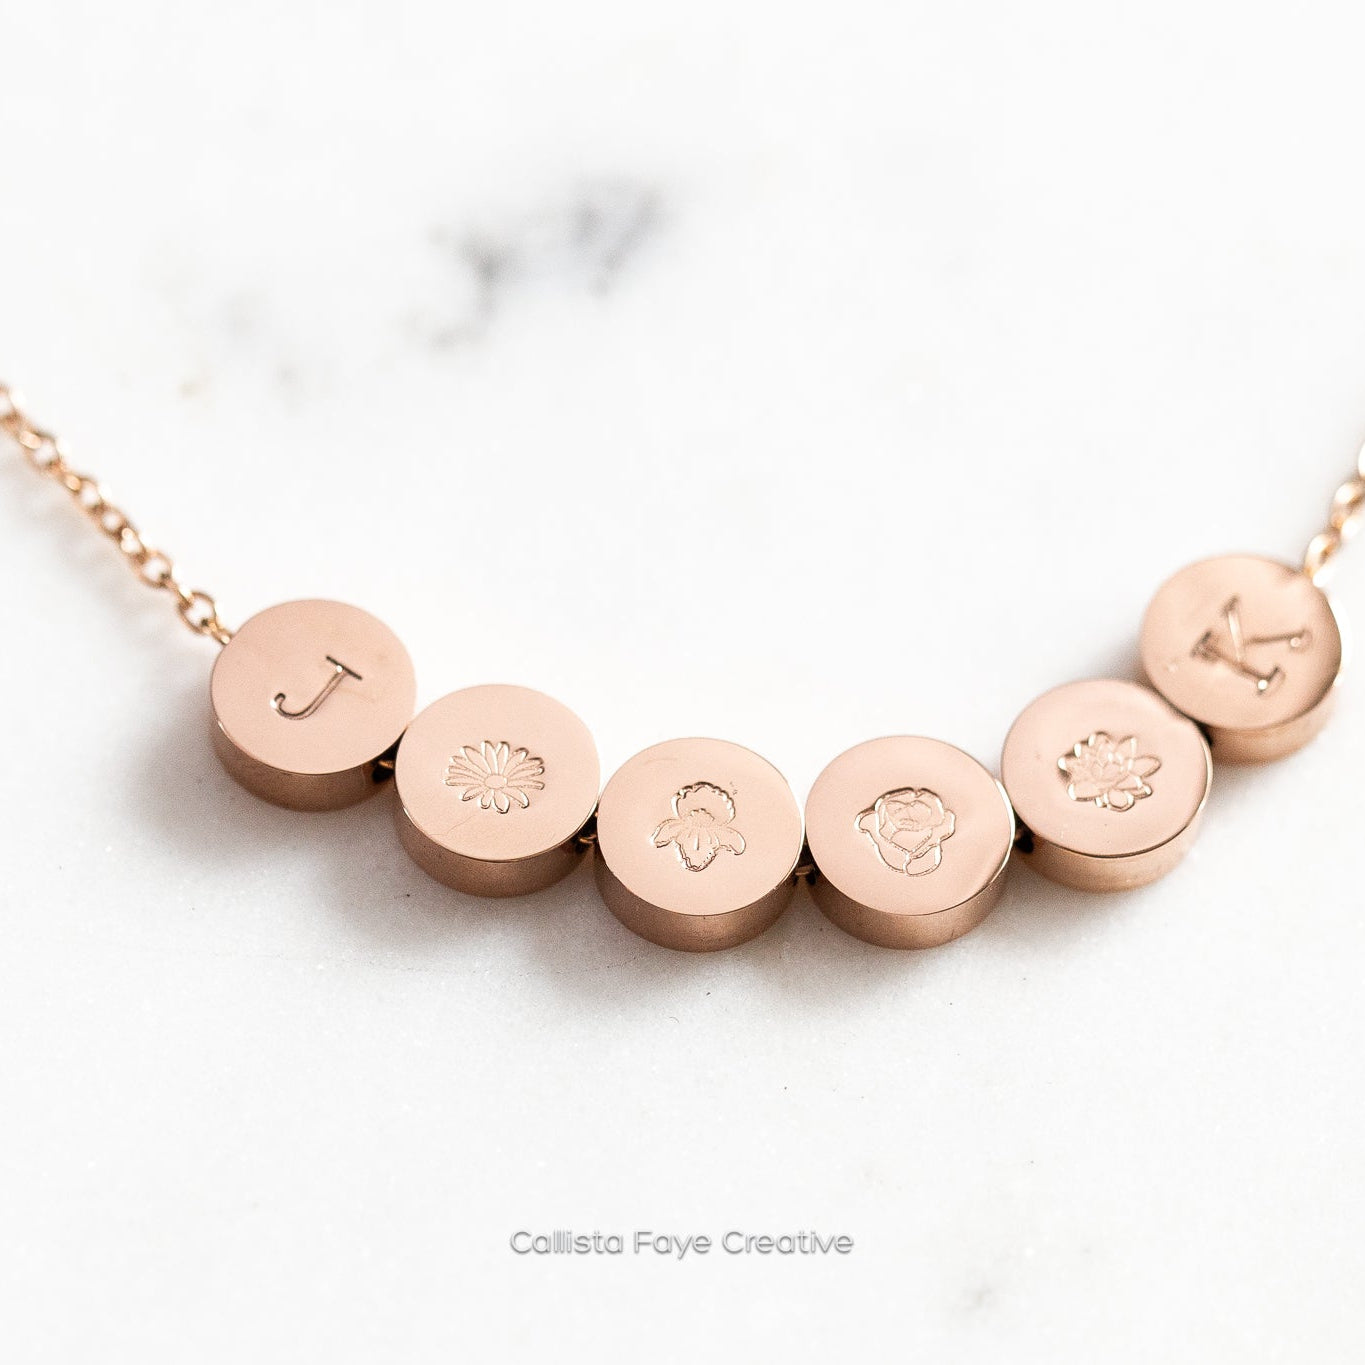 Custom Initial, Birth Flower Mini Coin Bead Necklace, Personalized Necklaces callistafaye 6 Beads Rose Gold 